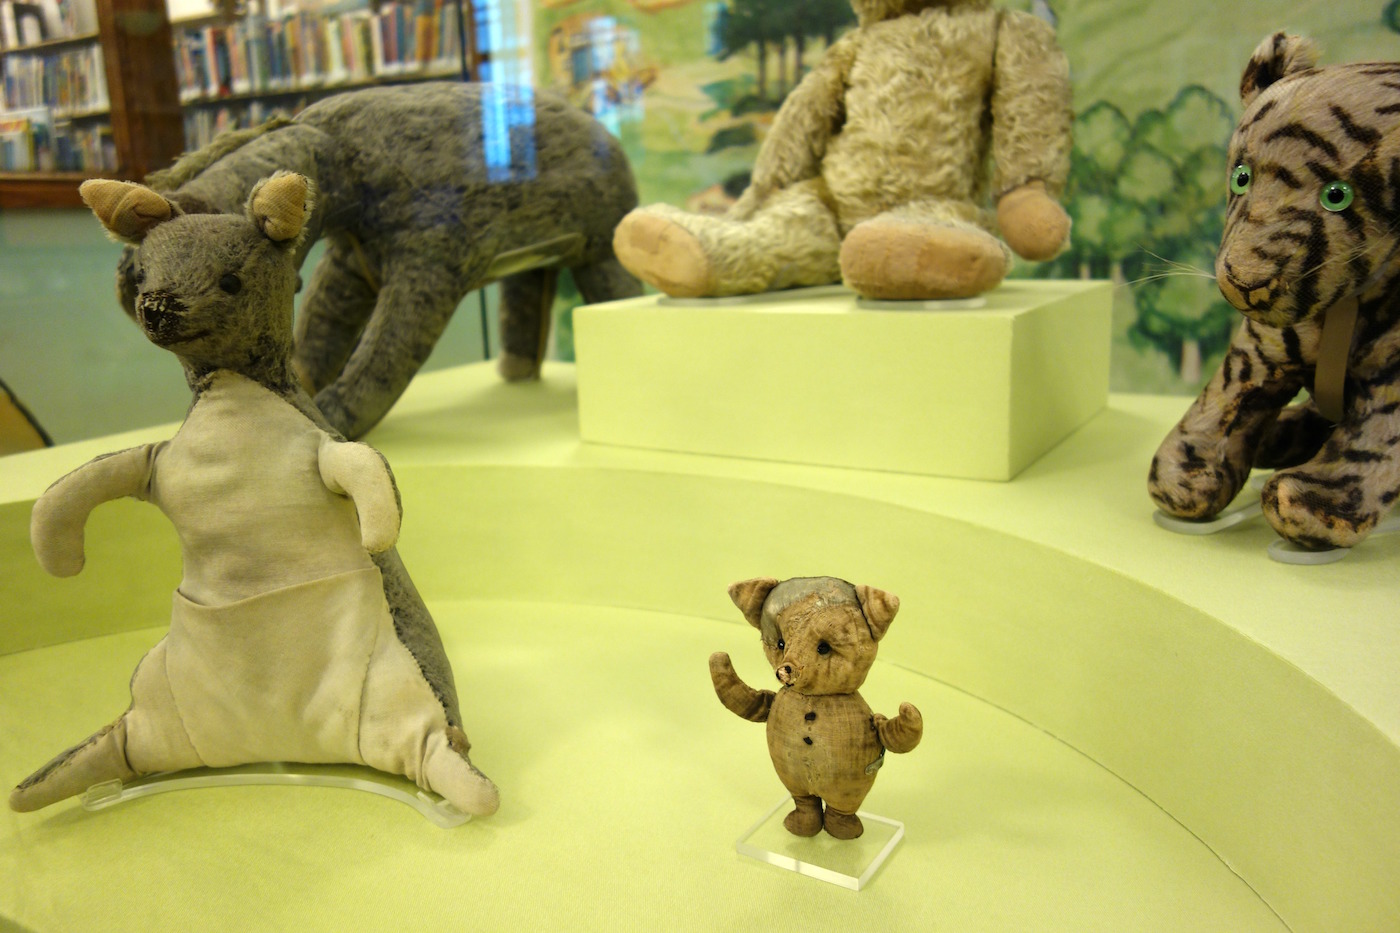 Winnie the Pooh at the New York Public Library